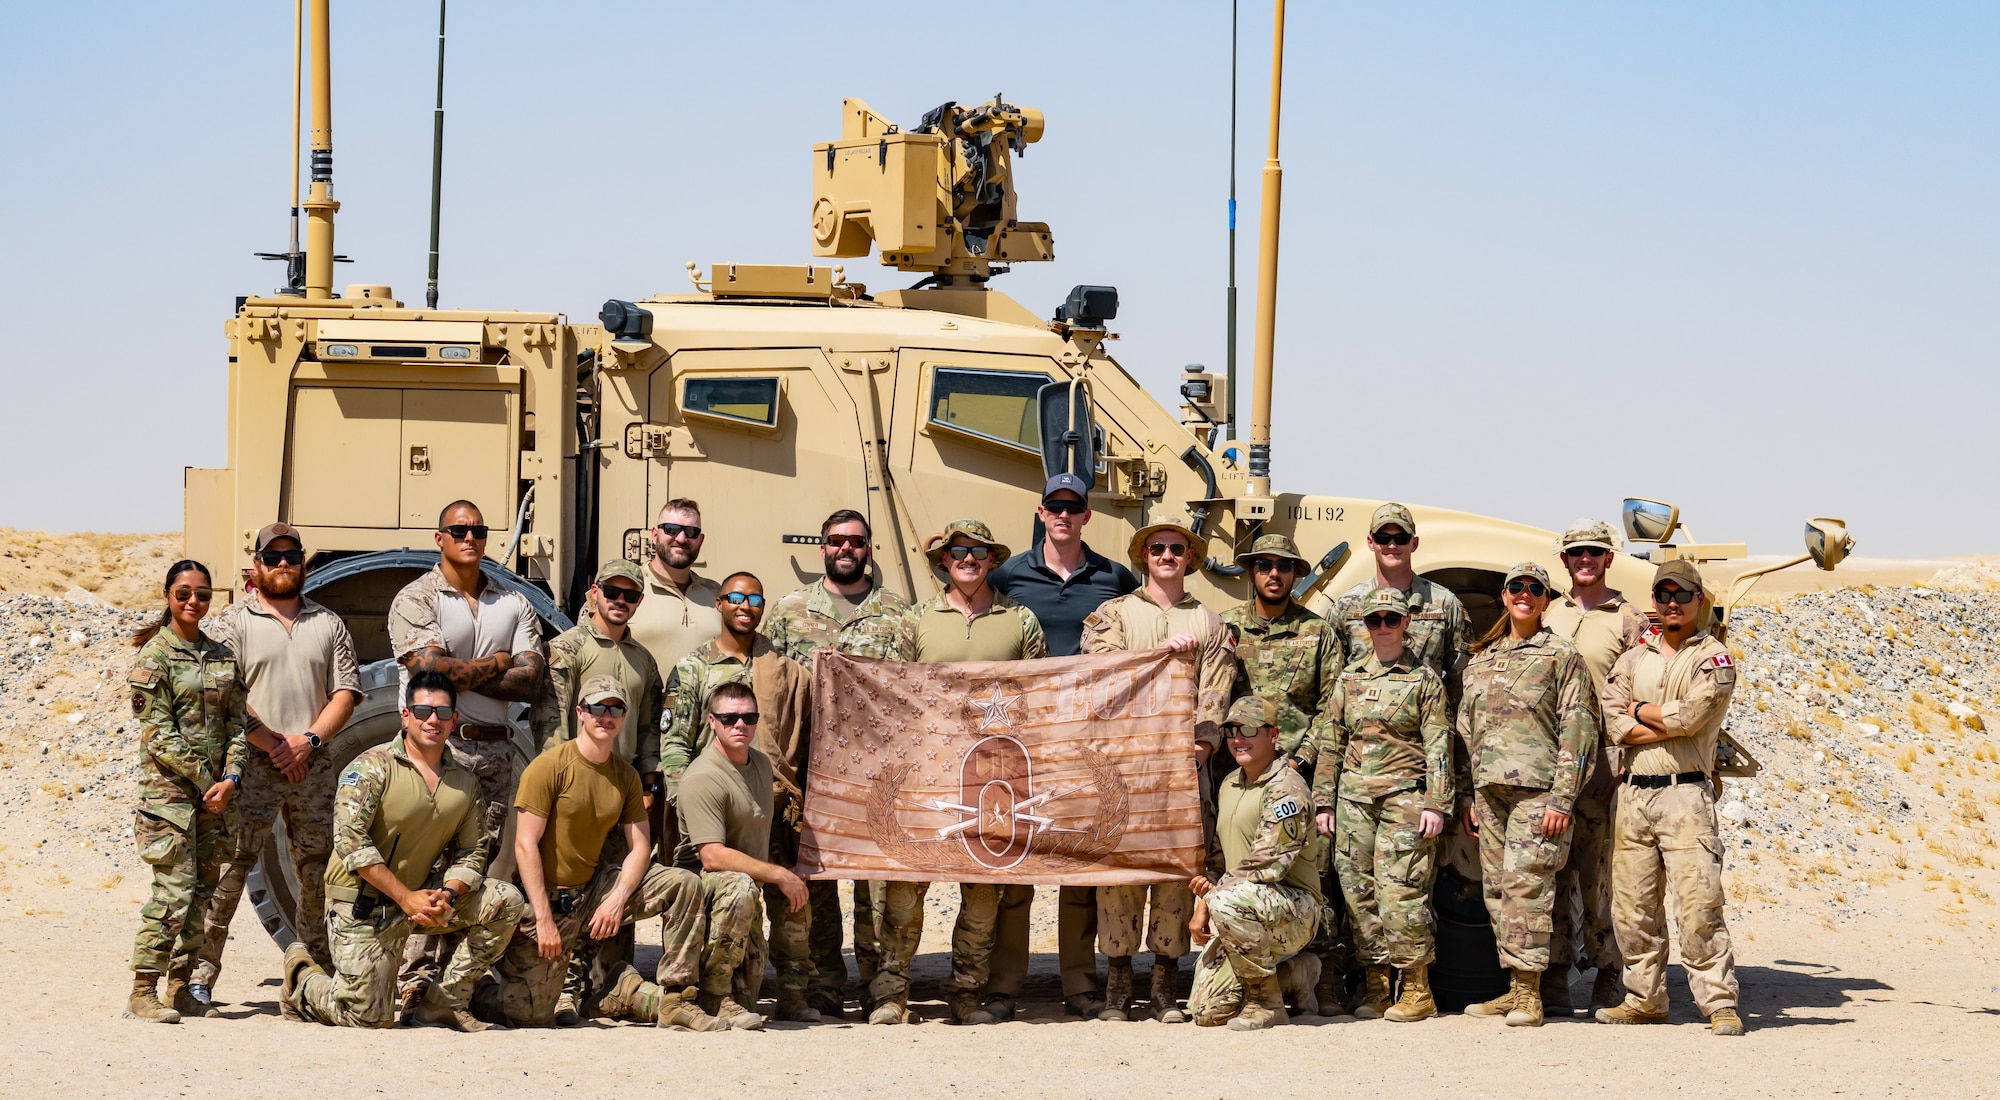 U.S., Canadian, and Danish armed forces members pose for a photo after completing a controlled detonation near Ali Al Salem Air Base, Kuwait, July 21, 2023. Explosive ordnance technicians from the 386th Expeditionary Civil Engineer Squadron frequently work with our coalition partners during demolitions to destroy various hazardous materials in a safe and controlled environment. (U.S. Air Force photo by Staff Sgt. Kevin Long)